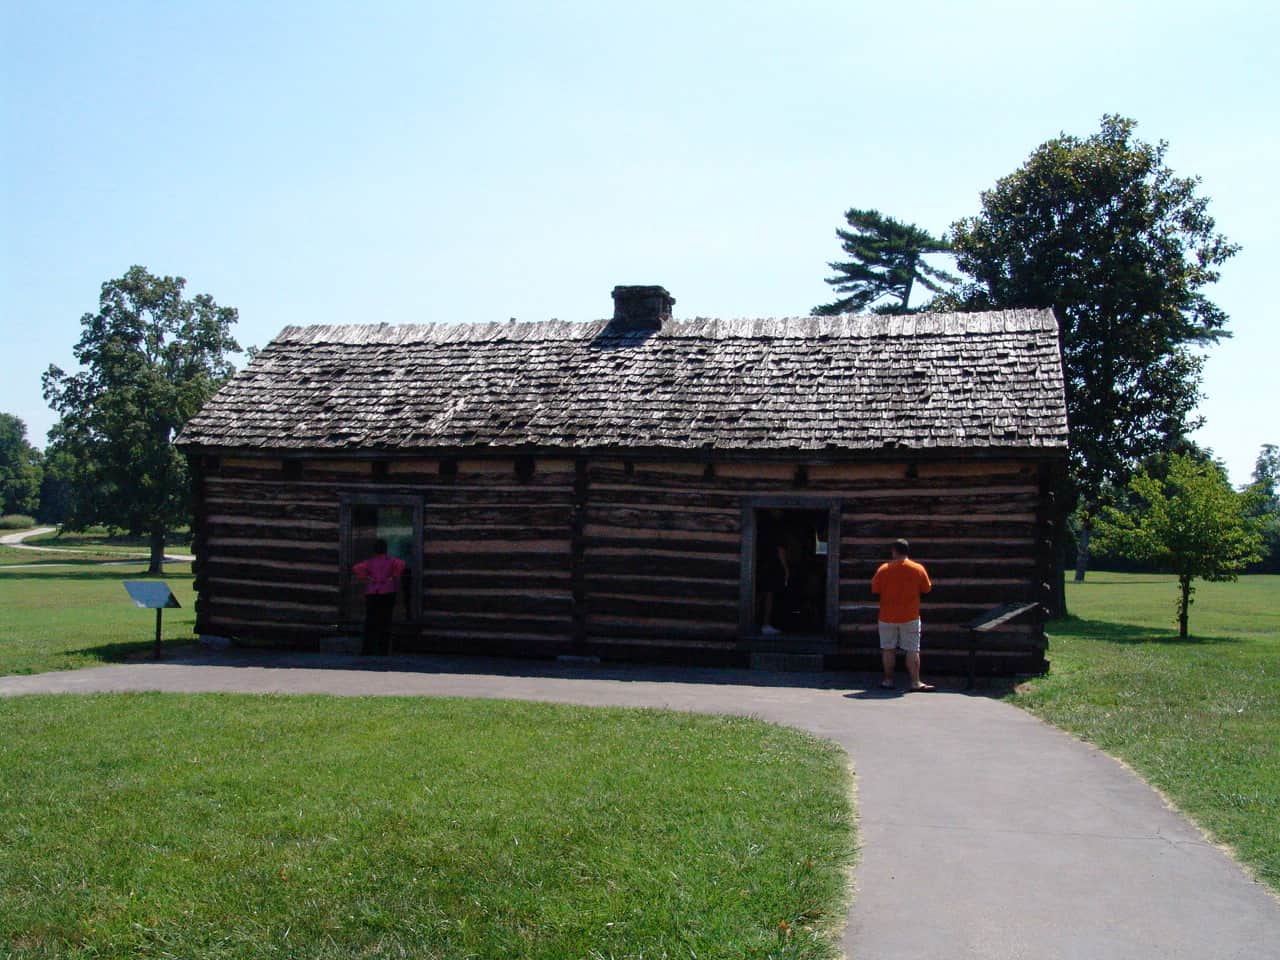 Alfred's Cabin at The Hermitage in Nashville, Tennessee